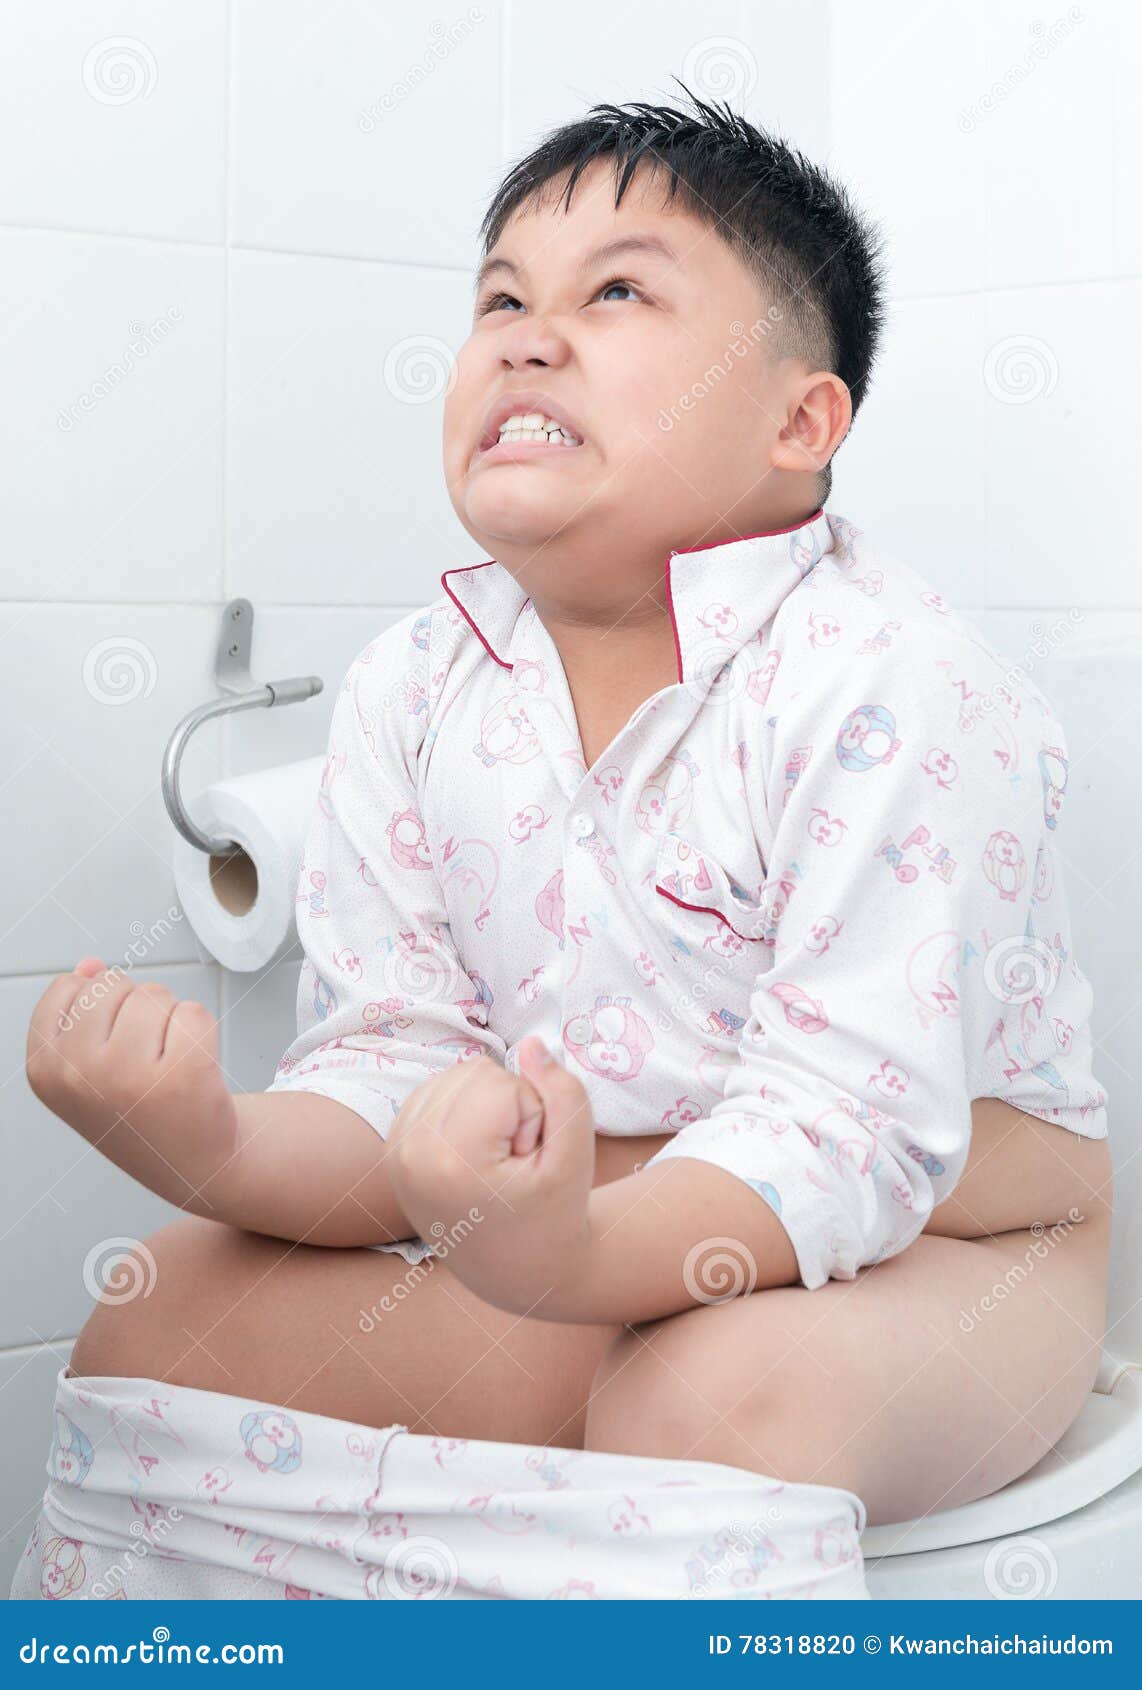 Thoughtful Man Looking Into The Toilet Bowl Stock Image 